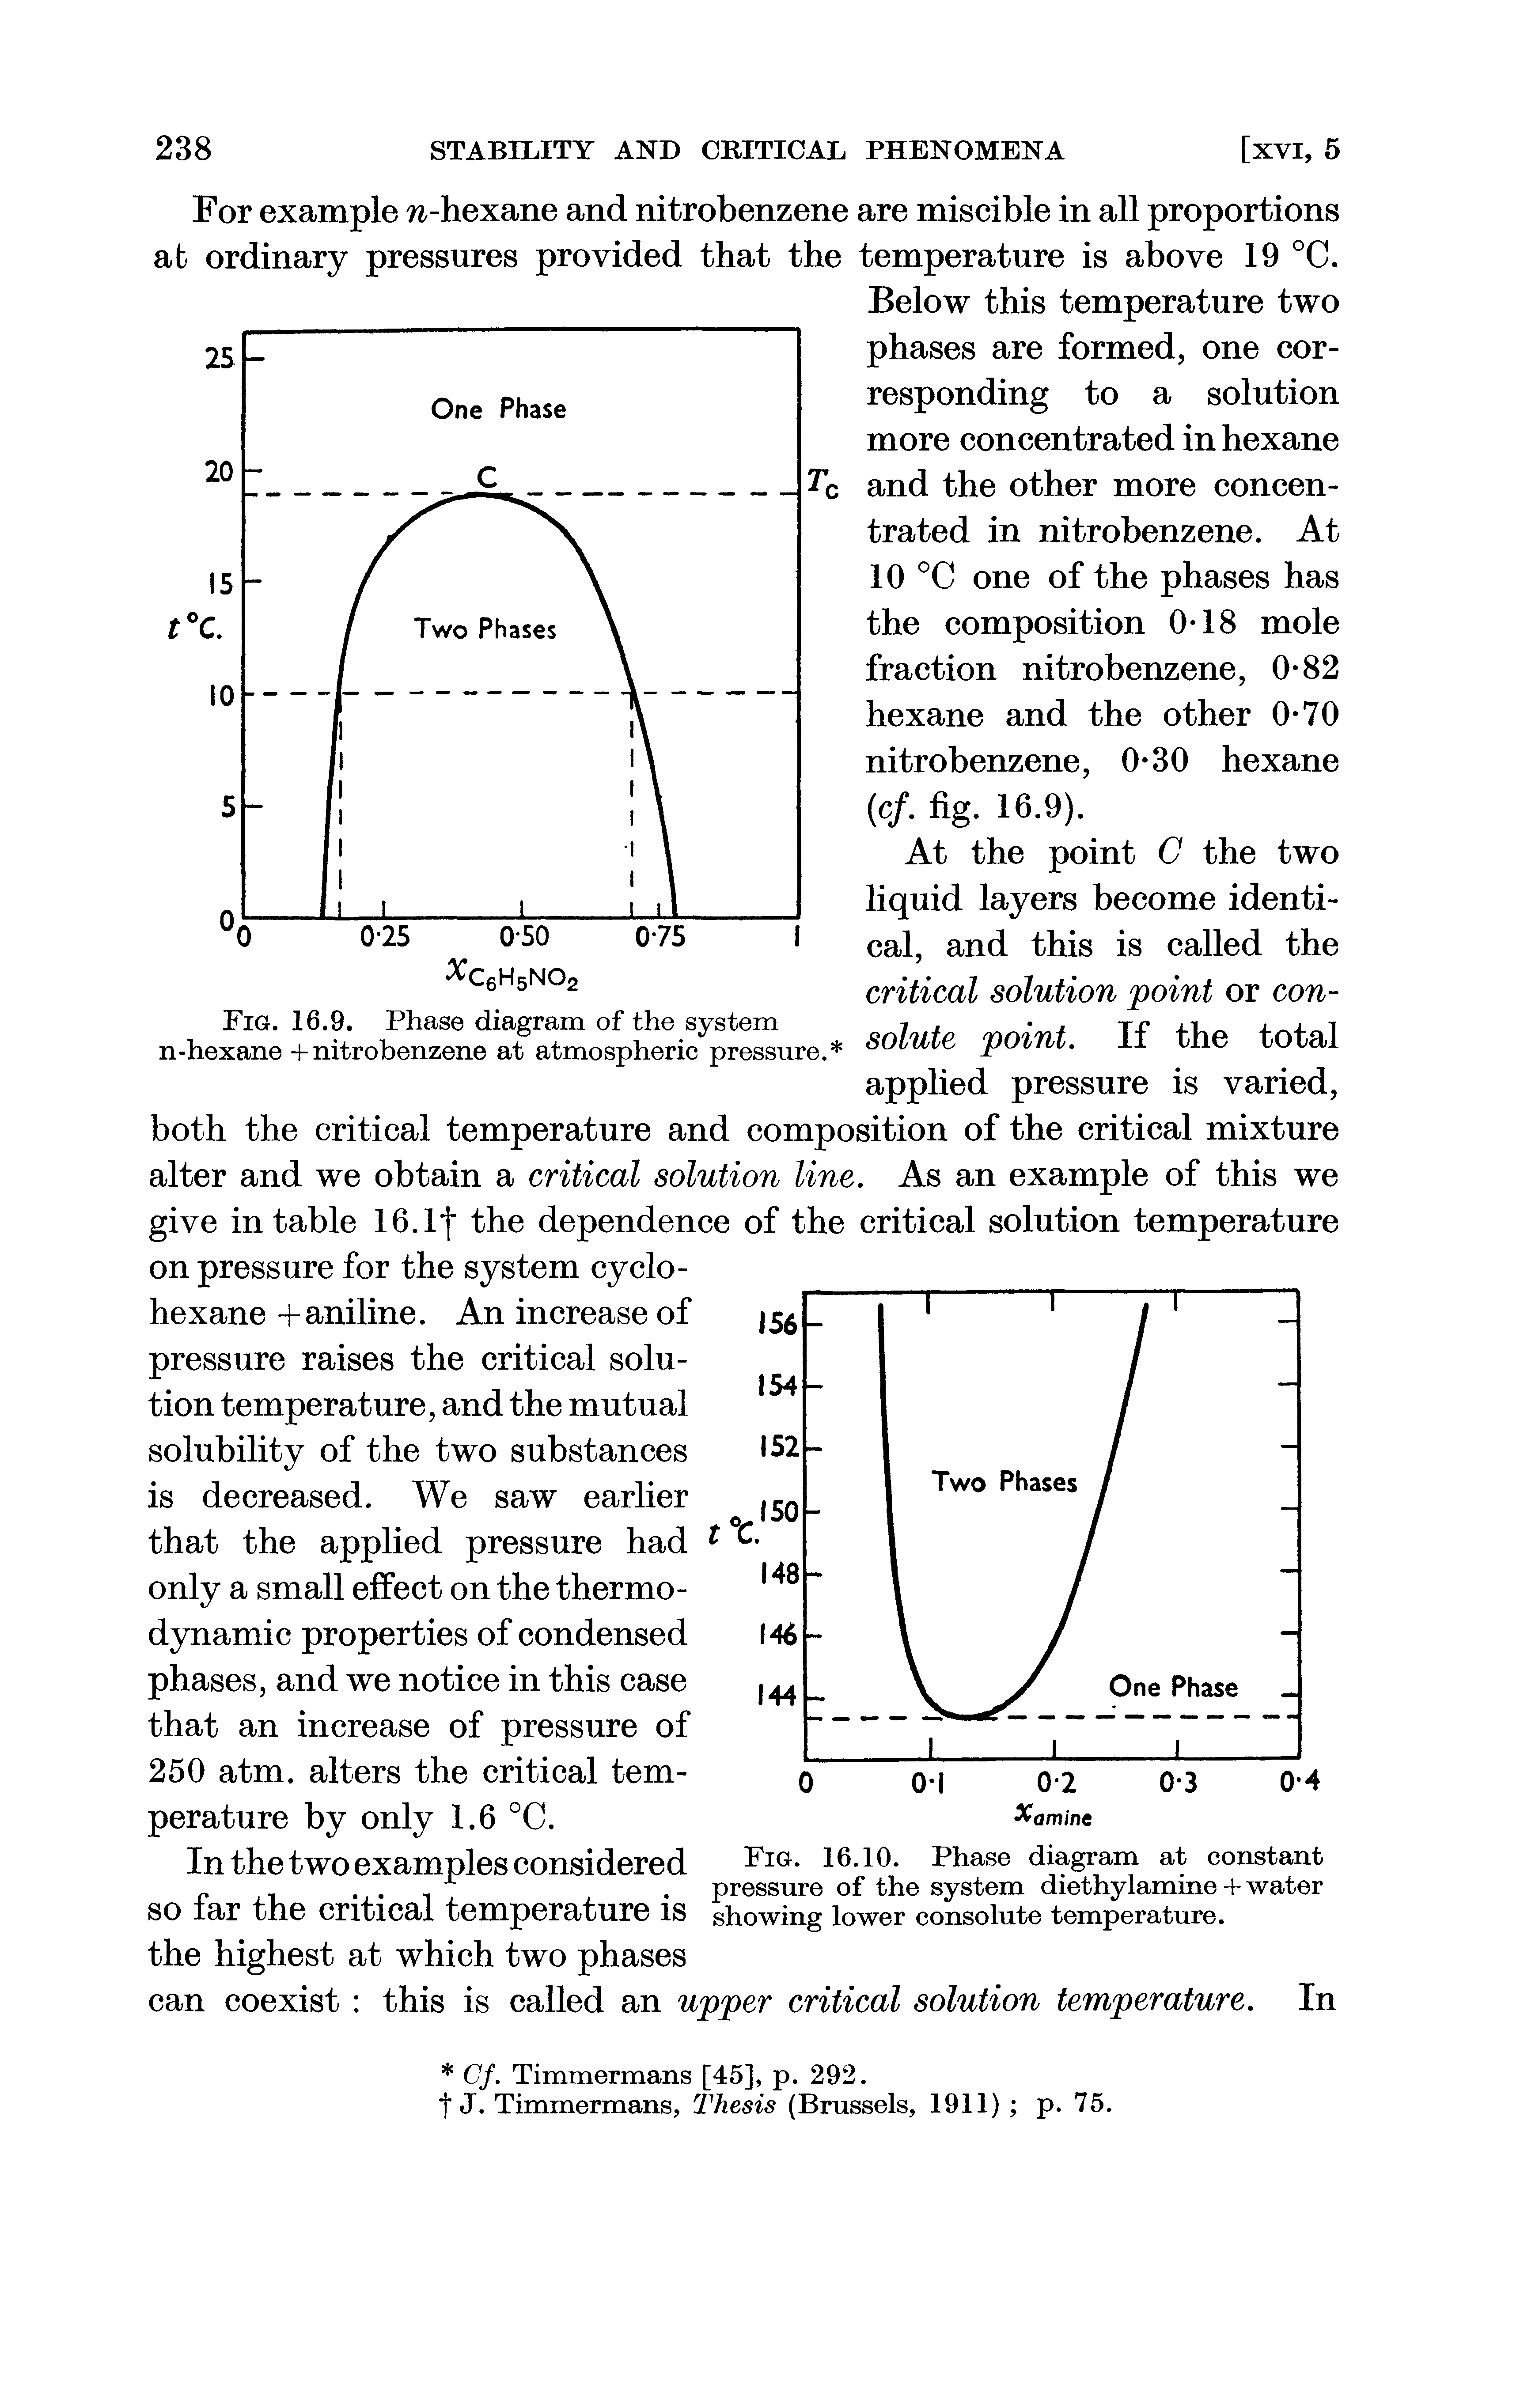 Fig. 16.10. Phase diagram at constant pressure of the system diethylamine + water...